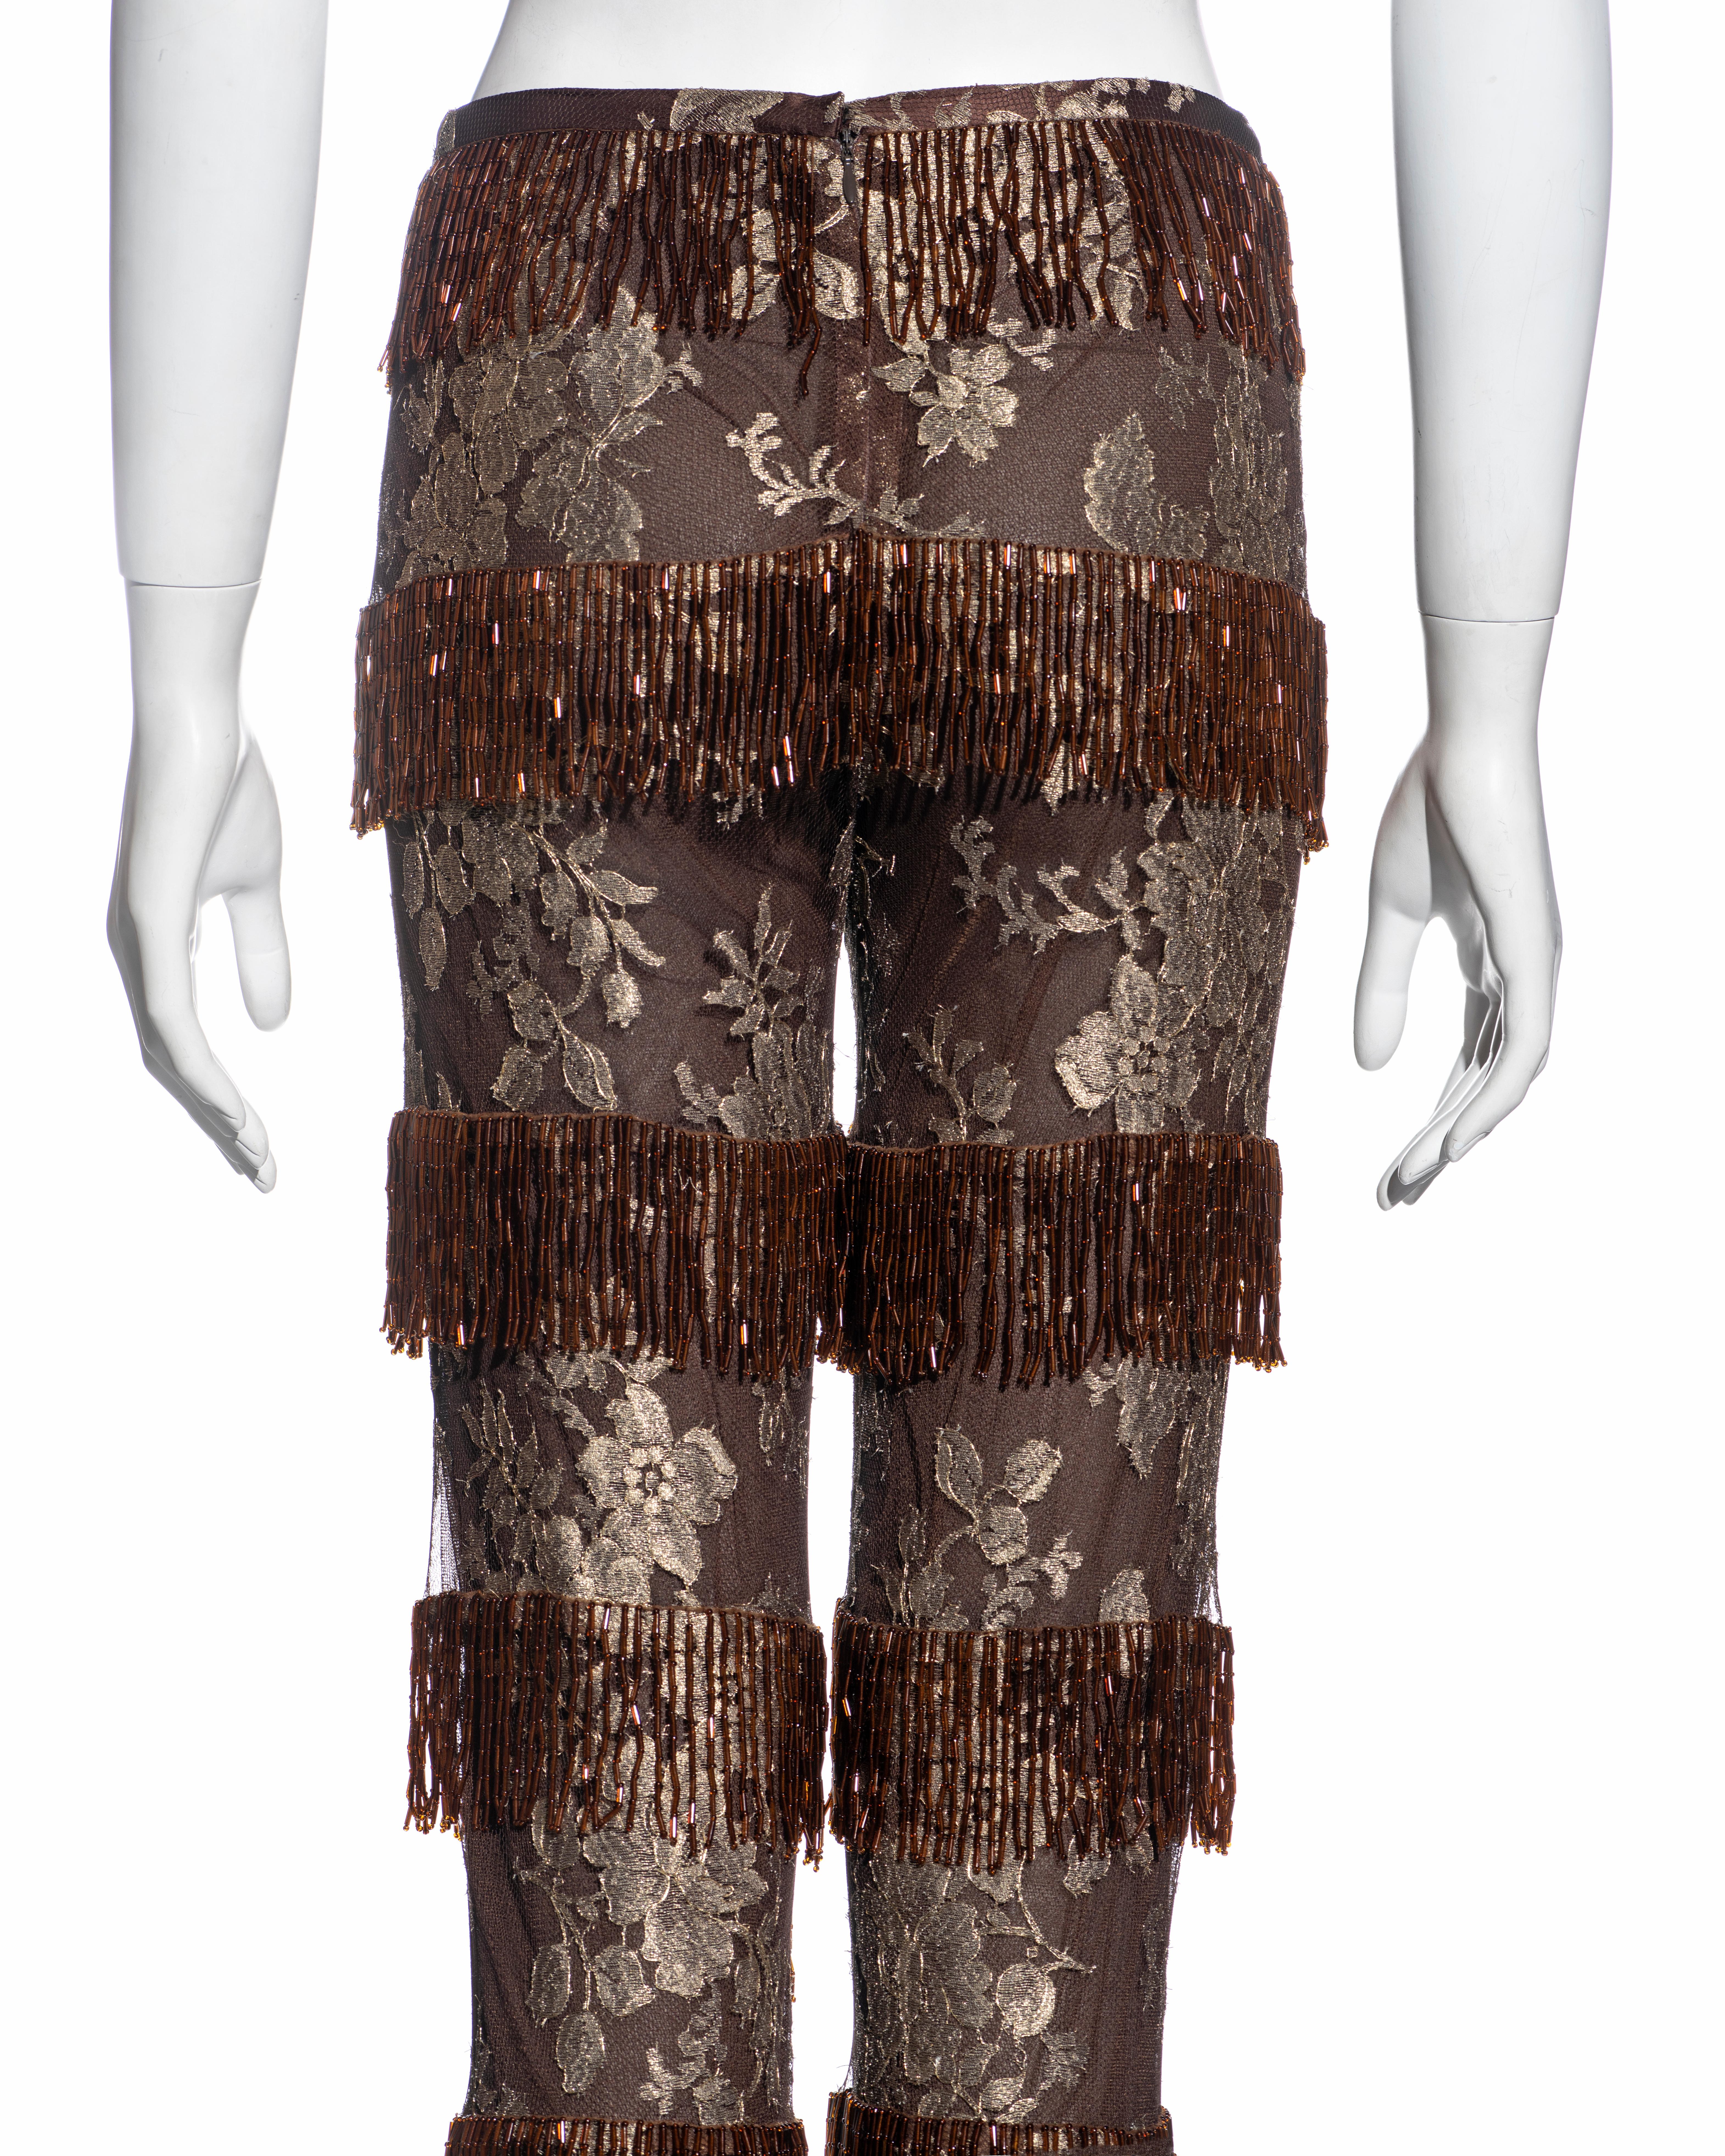 Dolce & Gabbana metallic gold and copper lace beaded fringe pants, ss 2000 In Good Condition For Sale In London, GB